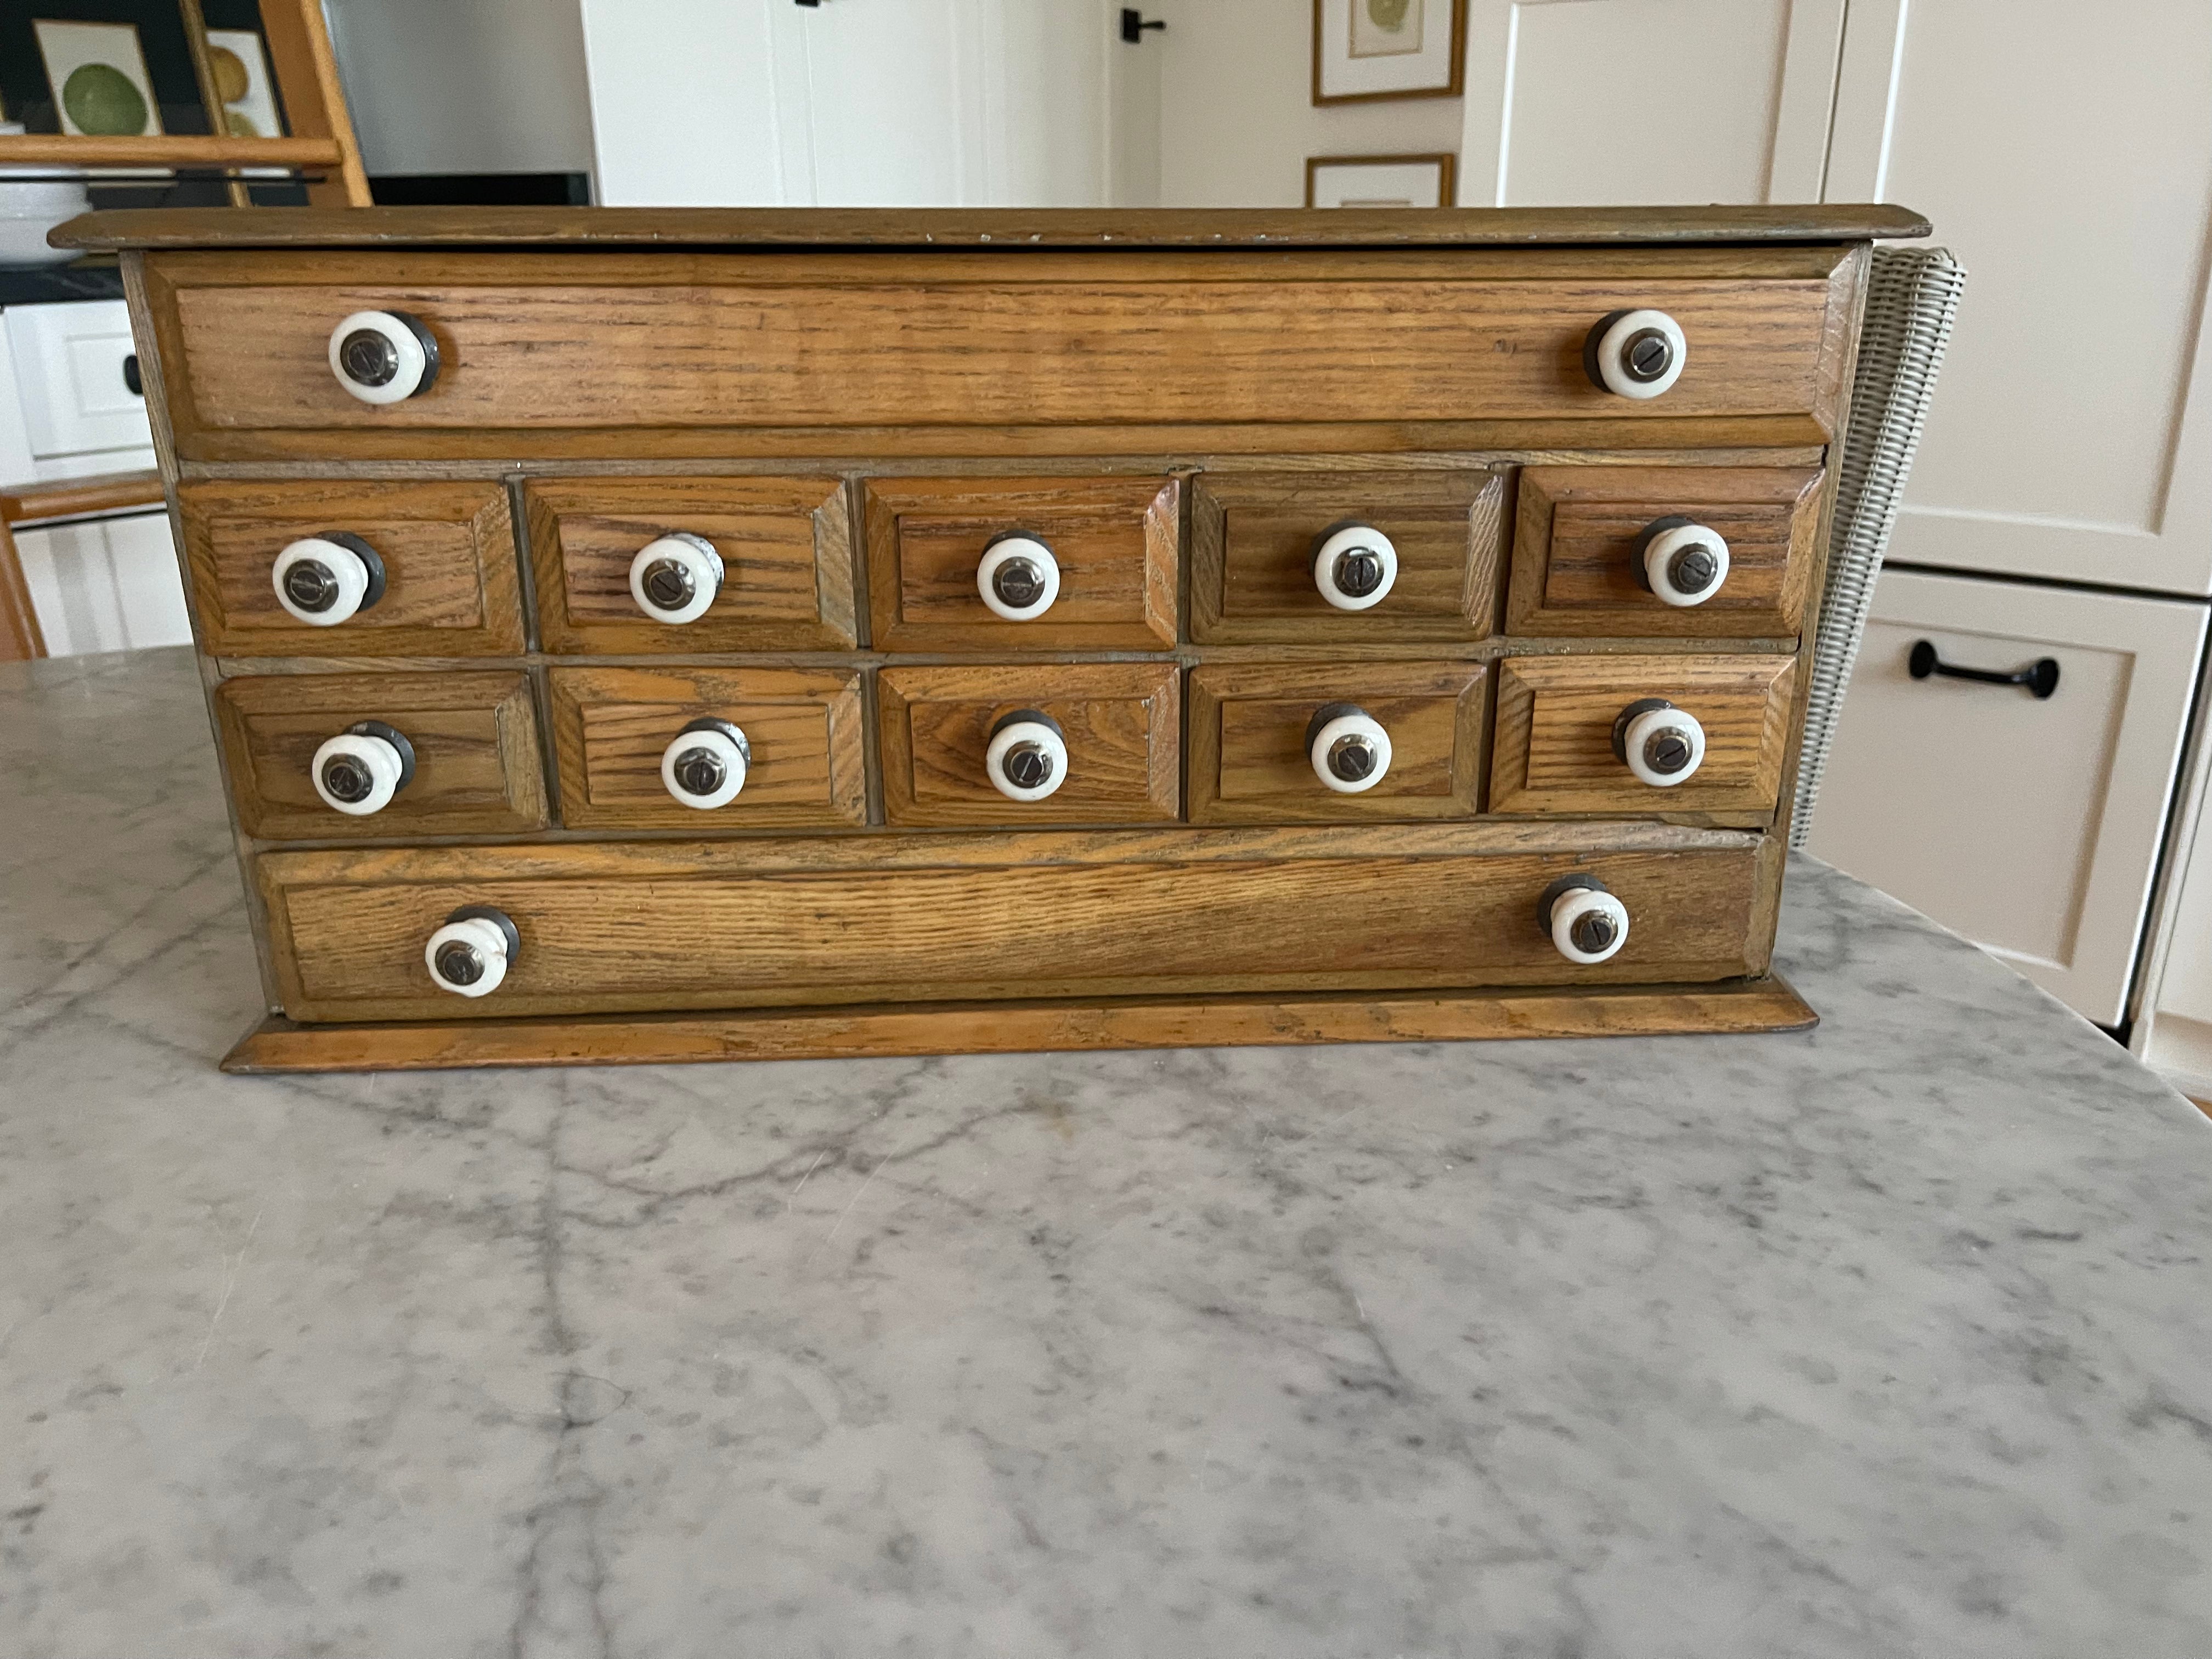 Vintage Wood Cabinet with White Porcelain Knobs